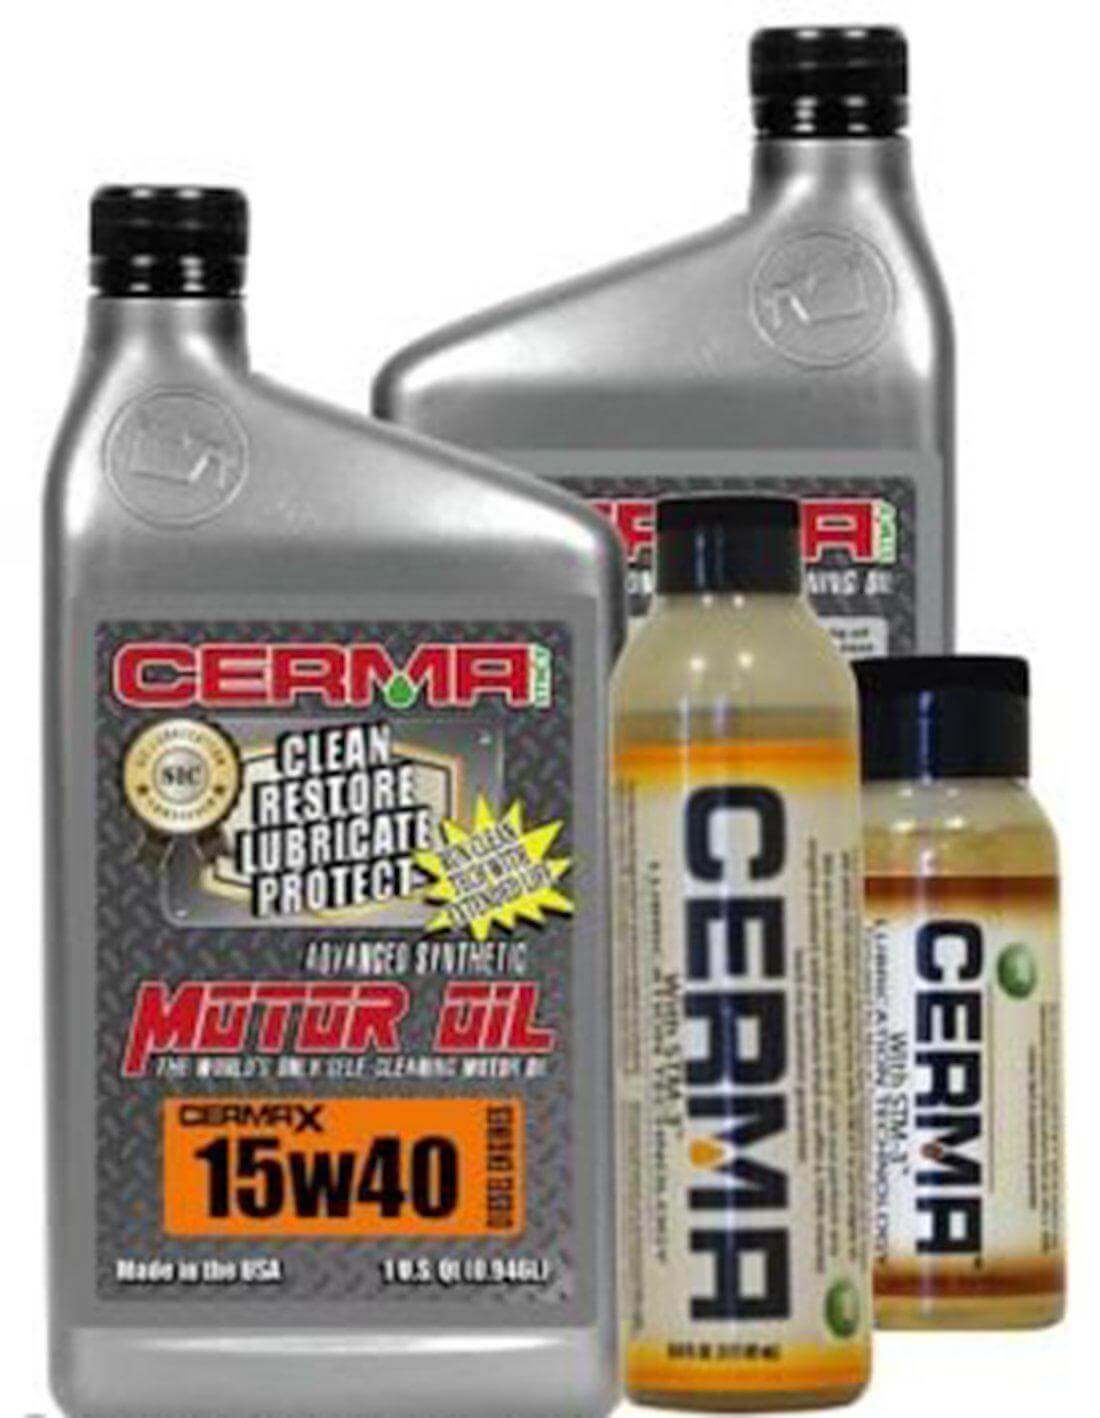 Cermax Diesel Ceramic Synthetic Oil Value Package for Pick Up Truck at $366.85 only from cermatreatment.com